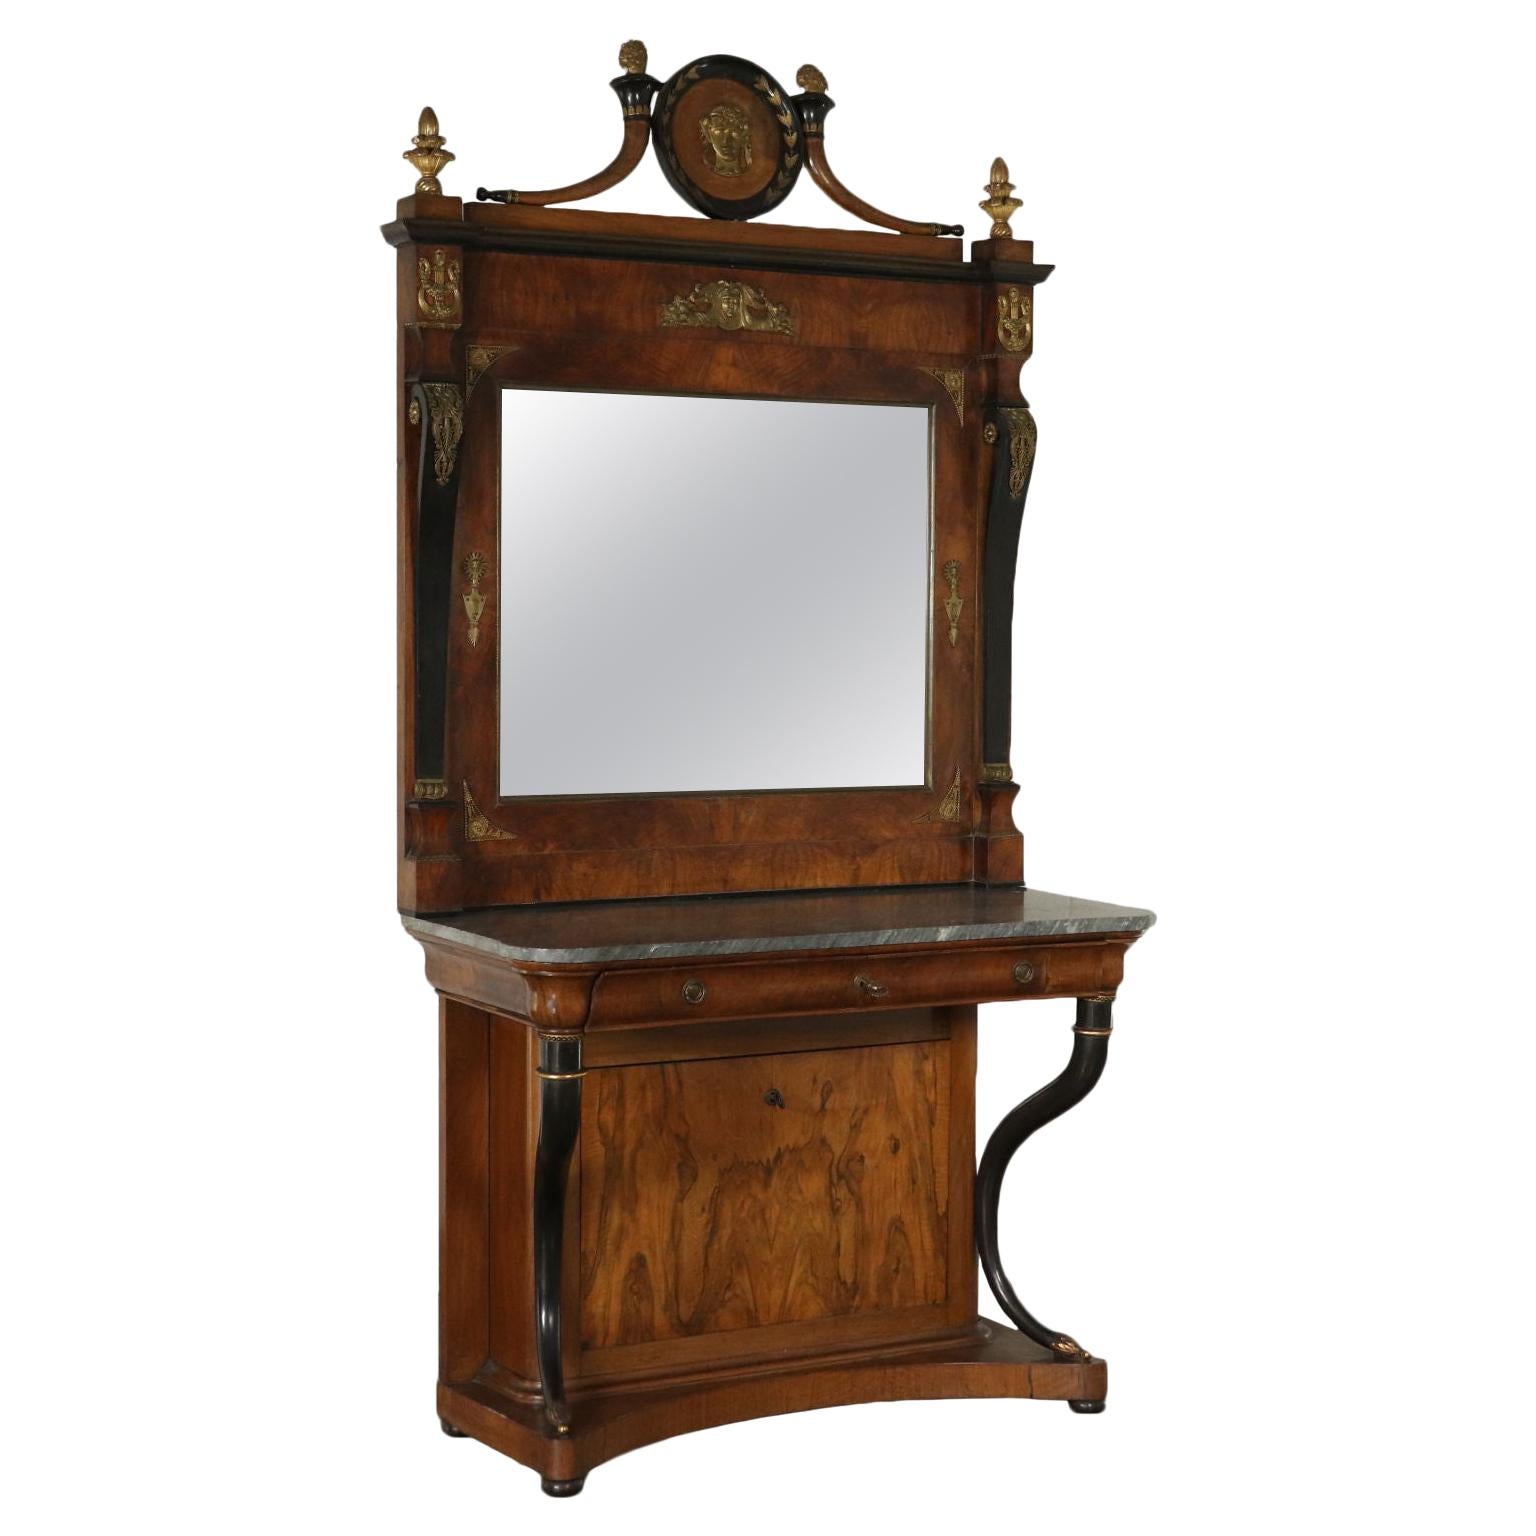 Impressive Console with Mirror, Italy, Second Quarter of the 1800s